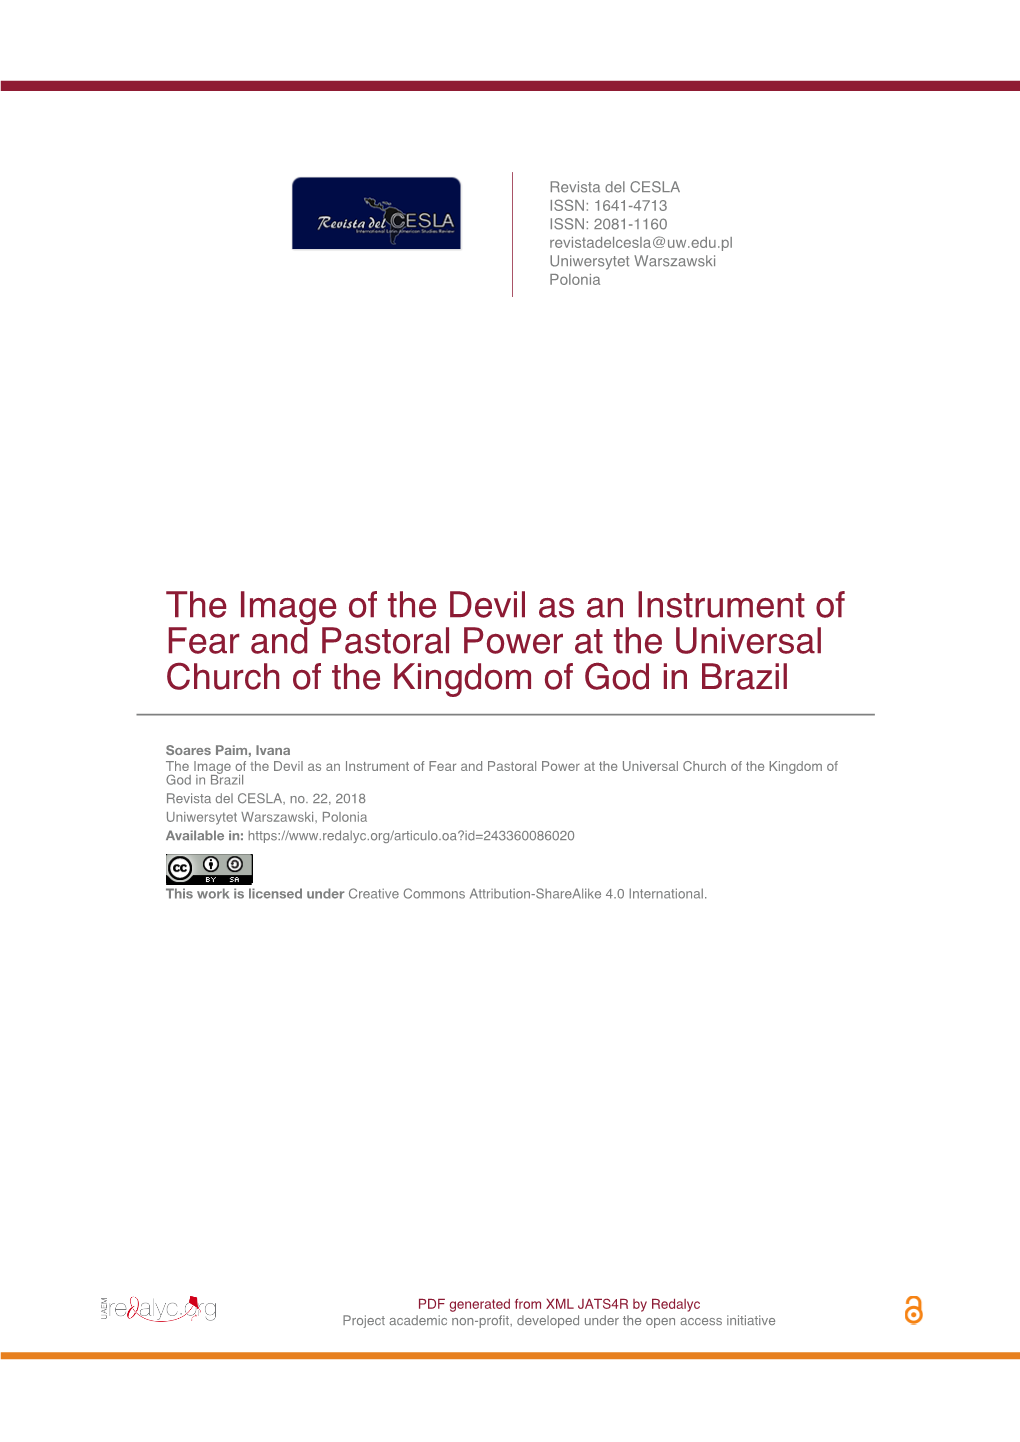 The Image of the Devil As an Instrument of Fear and Pastoral Power at the Universal Church of the Kingdom of God in Brazil